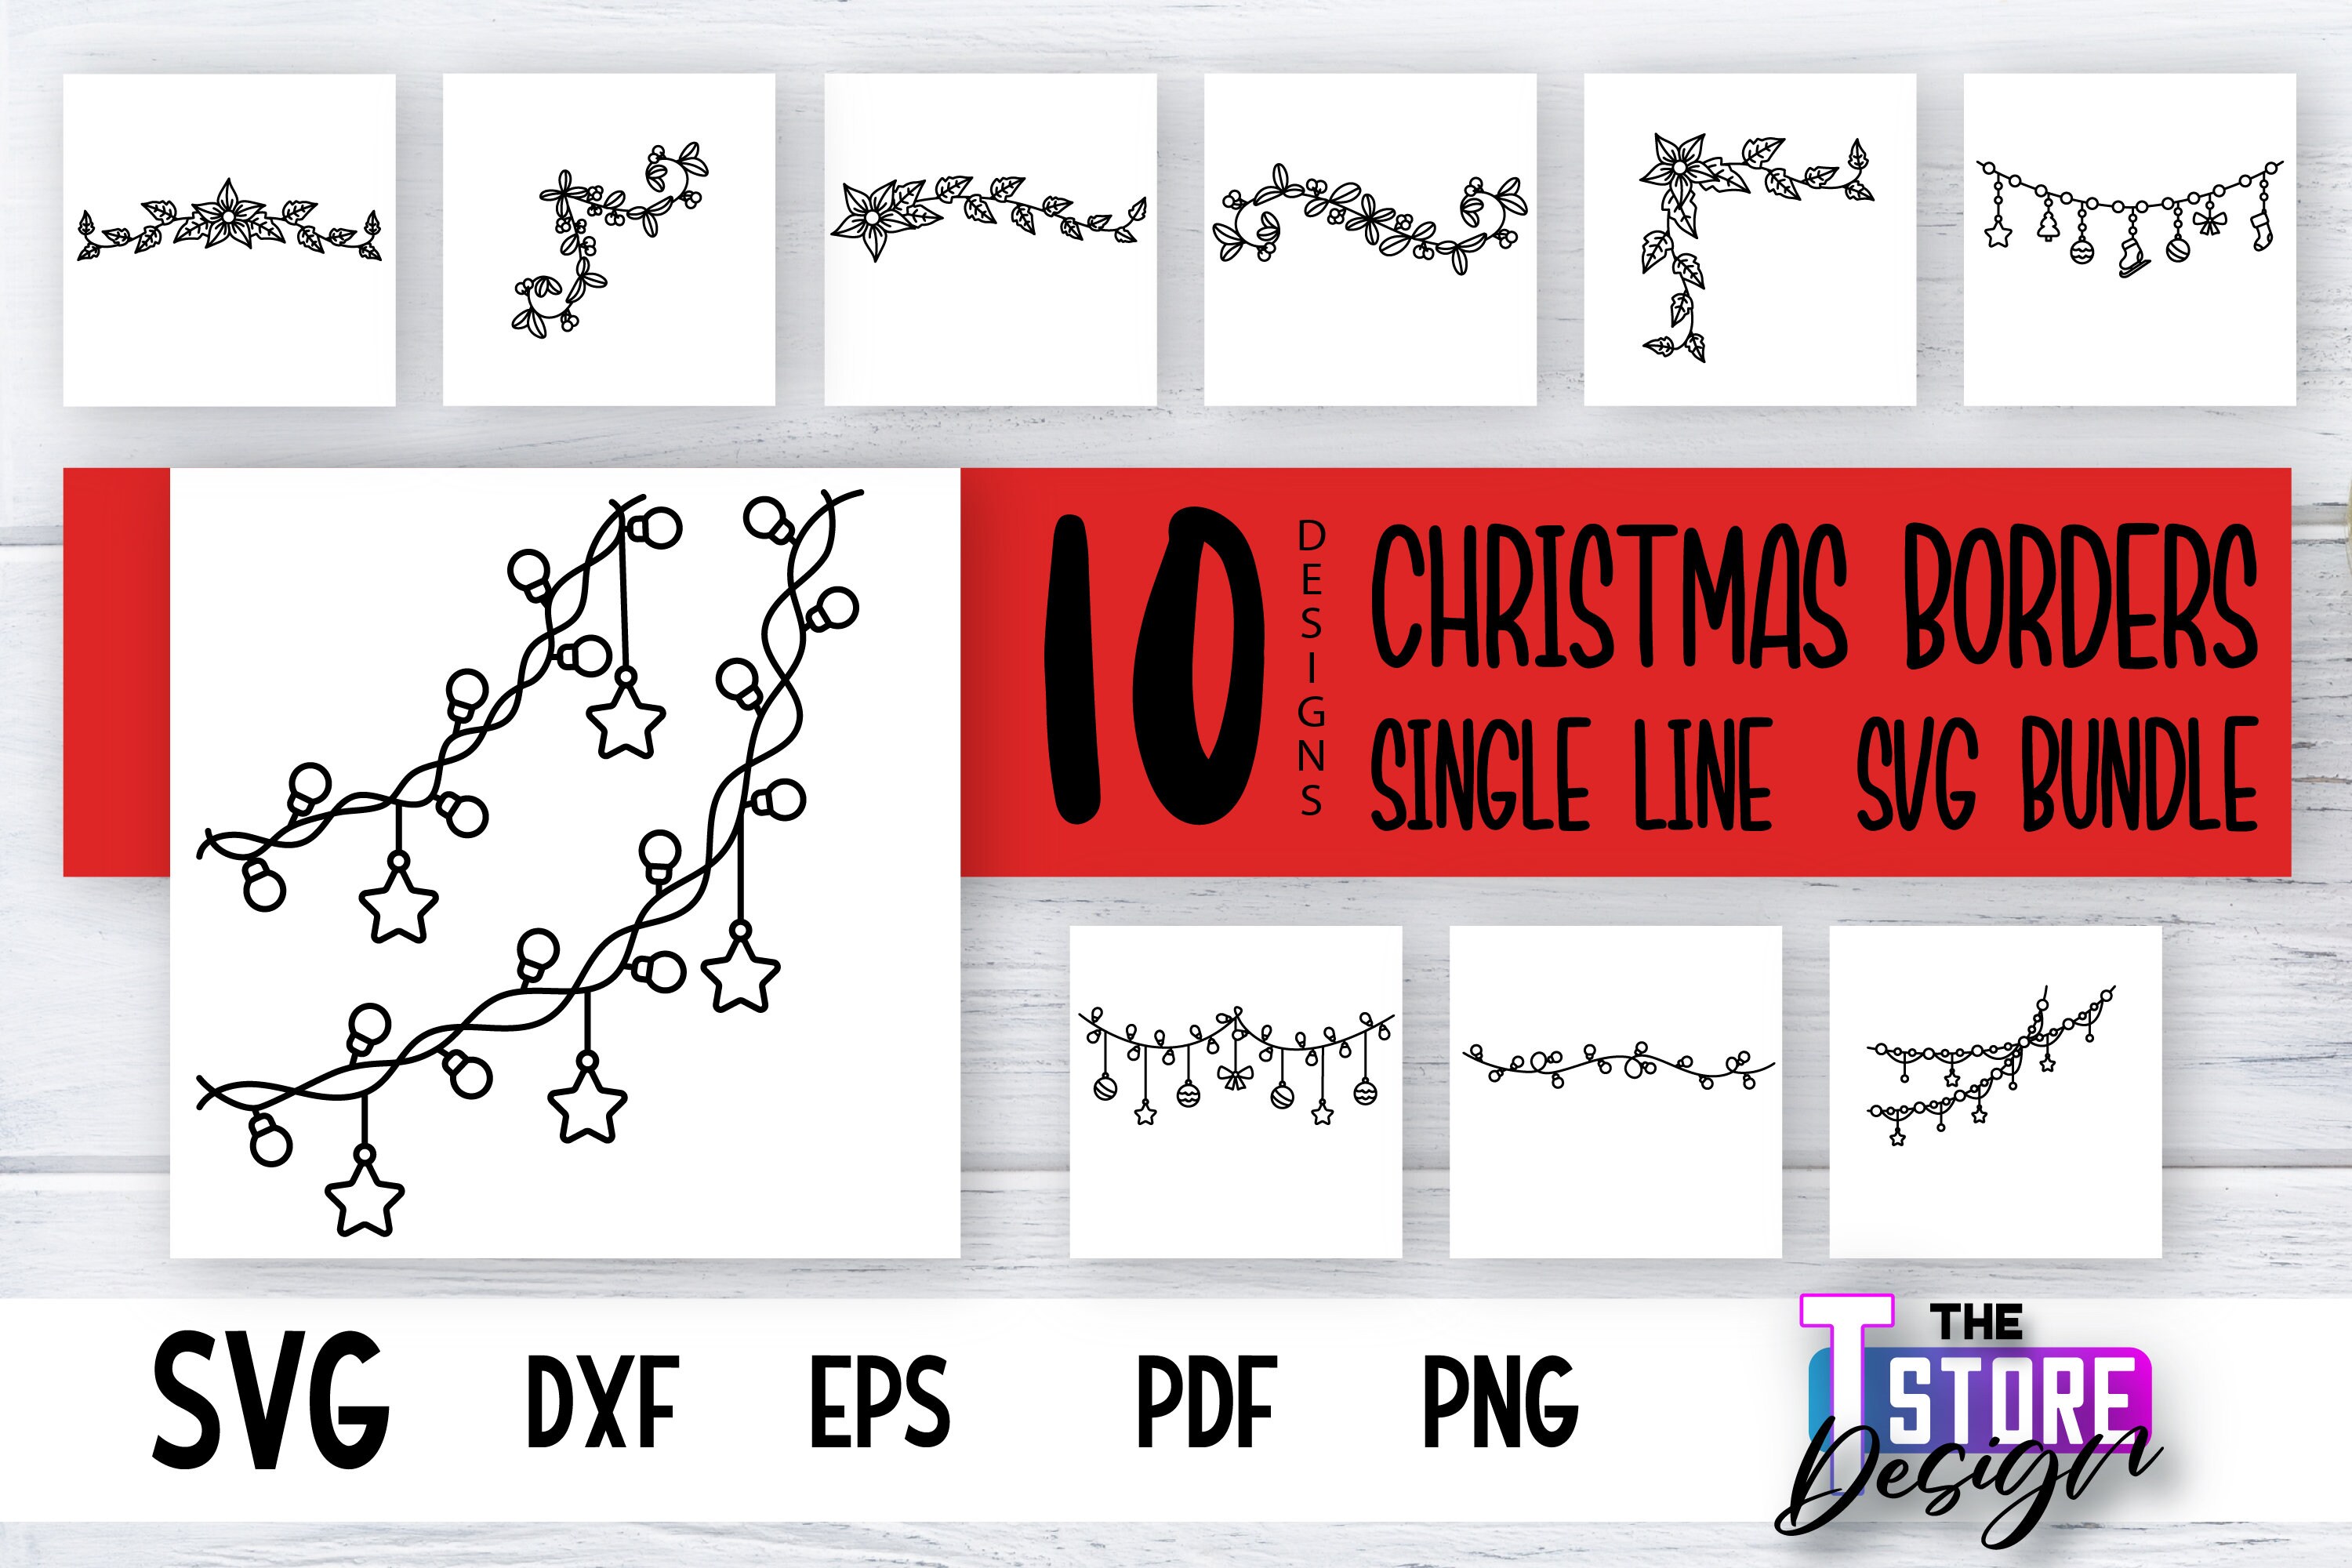 Single Line Christmas for Foil Quill 1 Graphic by Slim Studio